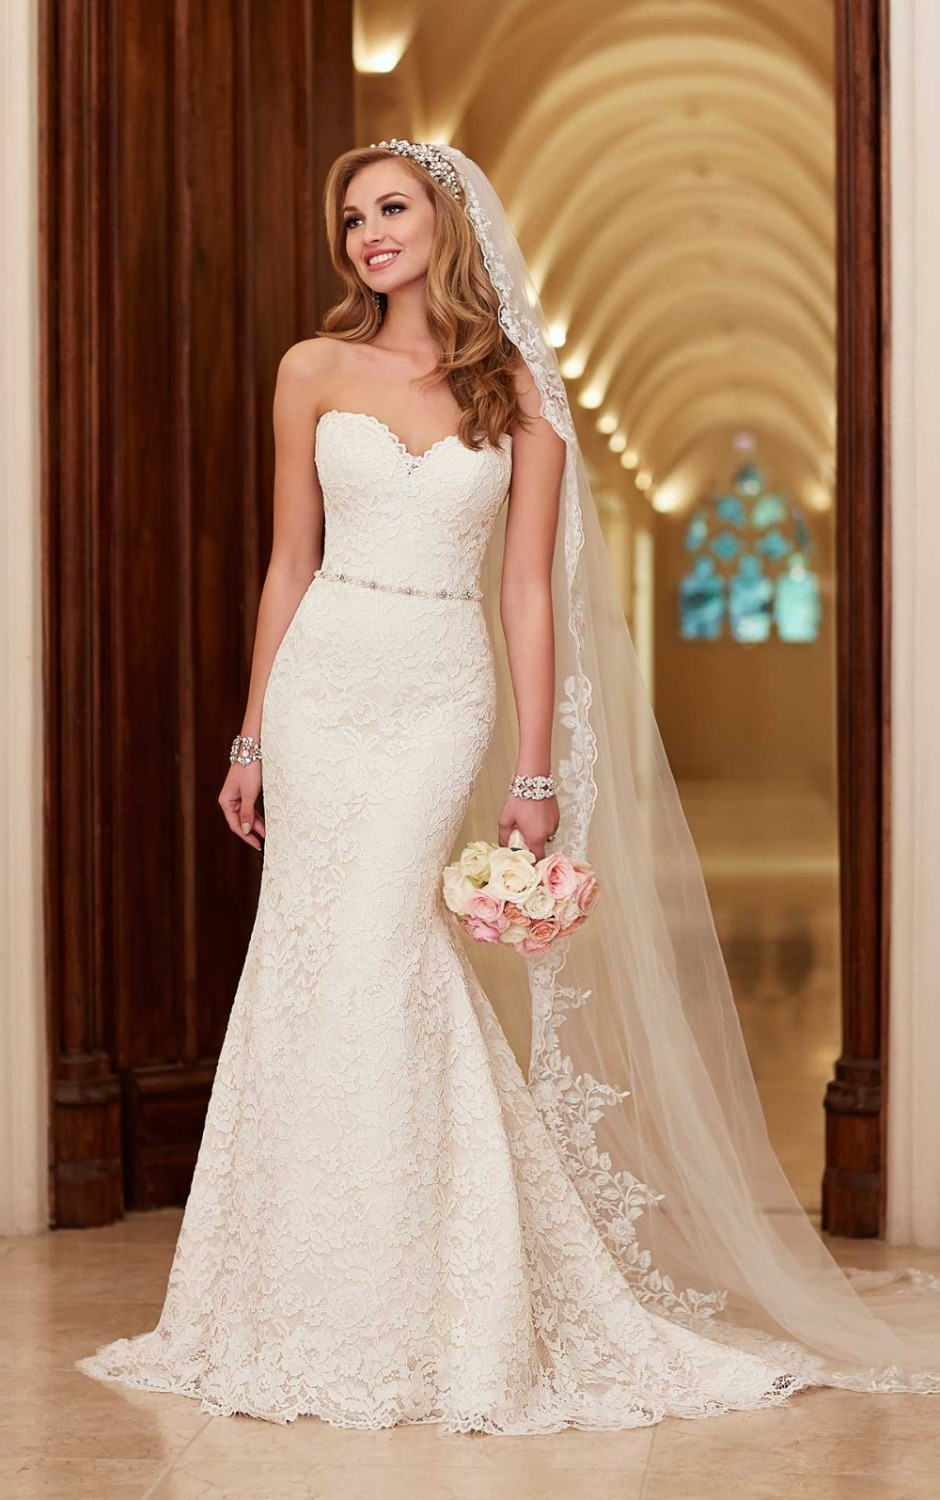 Wedding Dresses With Veils
 2016 Hot Sale Wedding Dresses with Free Appliques Veil by